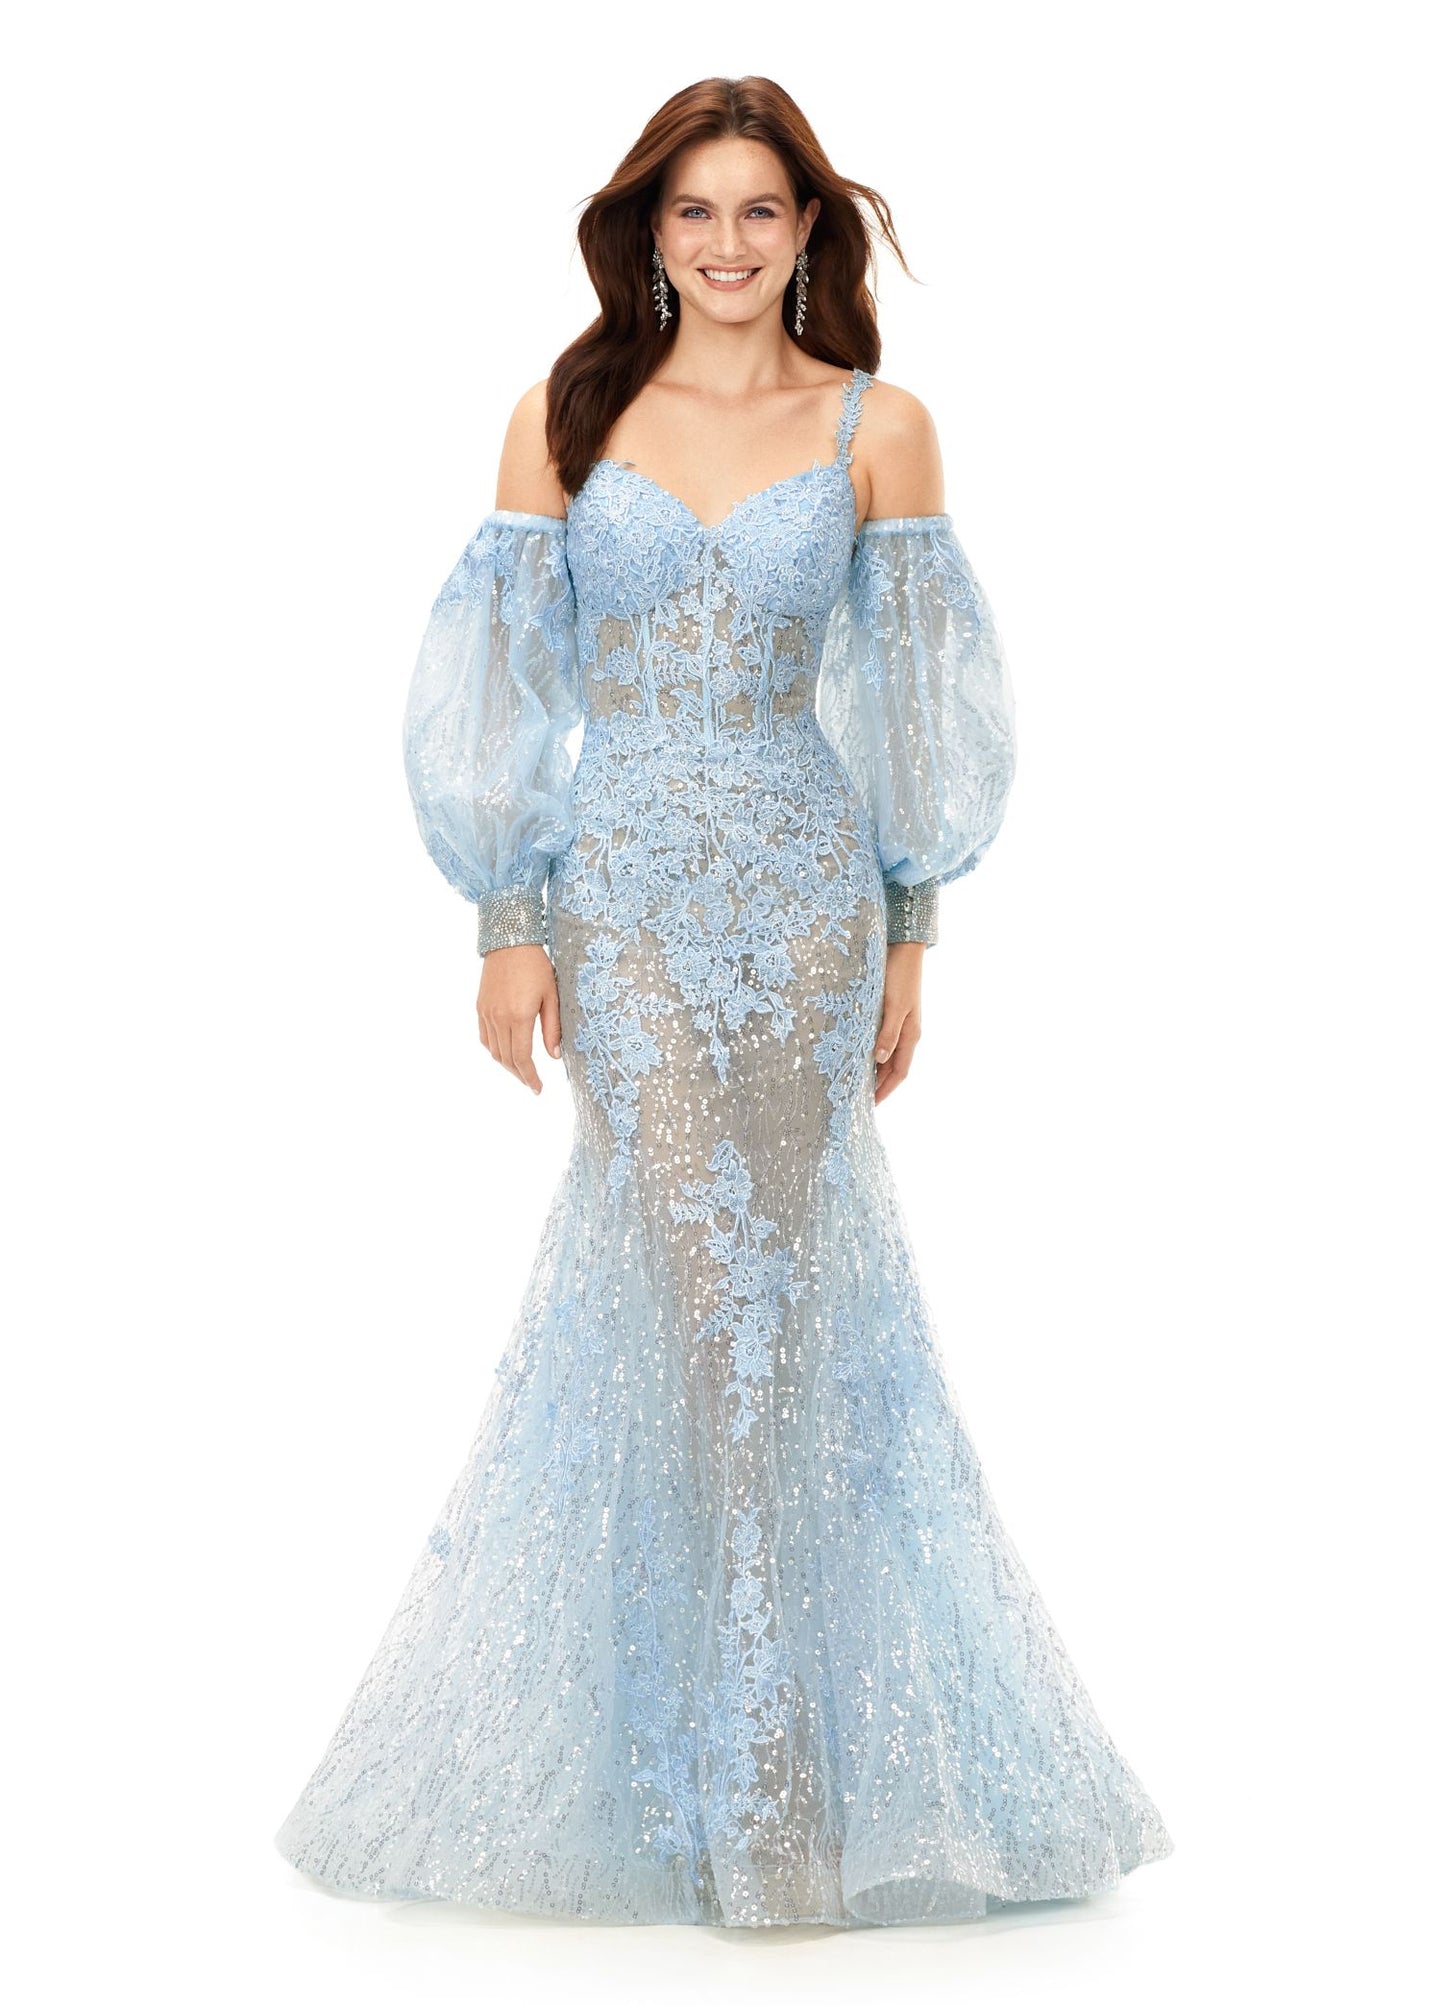 Ashley Lauren 11335 This stunning spaghetti strap sequin applique gown with appliques features an illusion corset bodice. The look is complete with a trumpet skirt and detachable puff sleeves. Spaghetti Straps Open Back Detachable Puff Sleeves Sequin Applique COLORS: Lilac, Sky